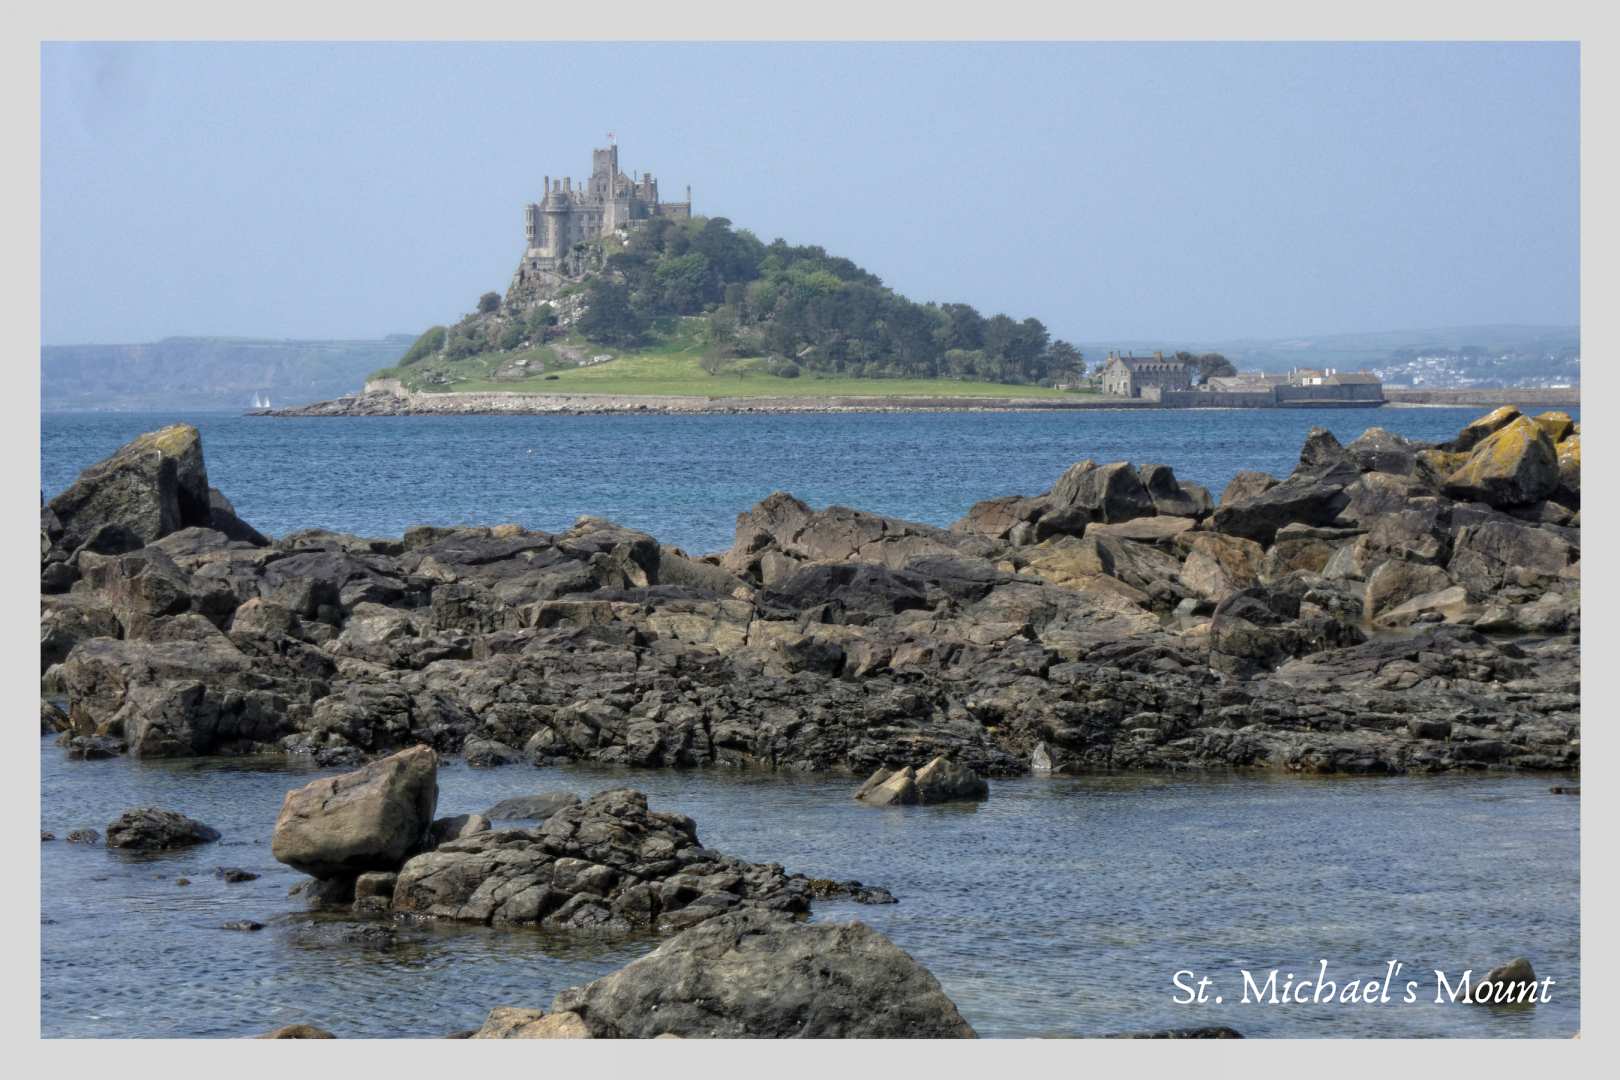 Circular Walking Trails: St Michael's Mt on the Land's End Round walk